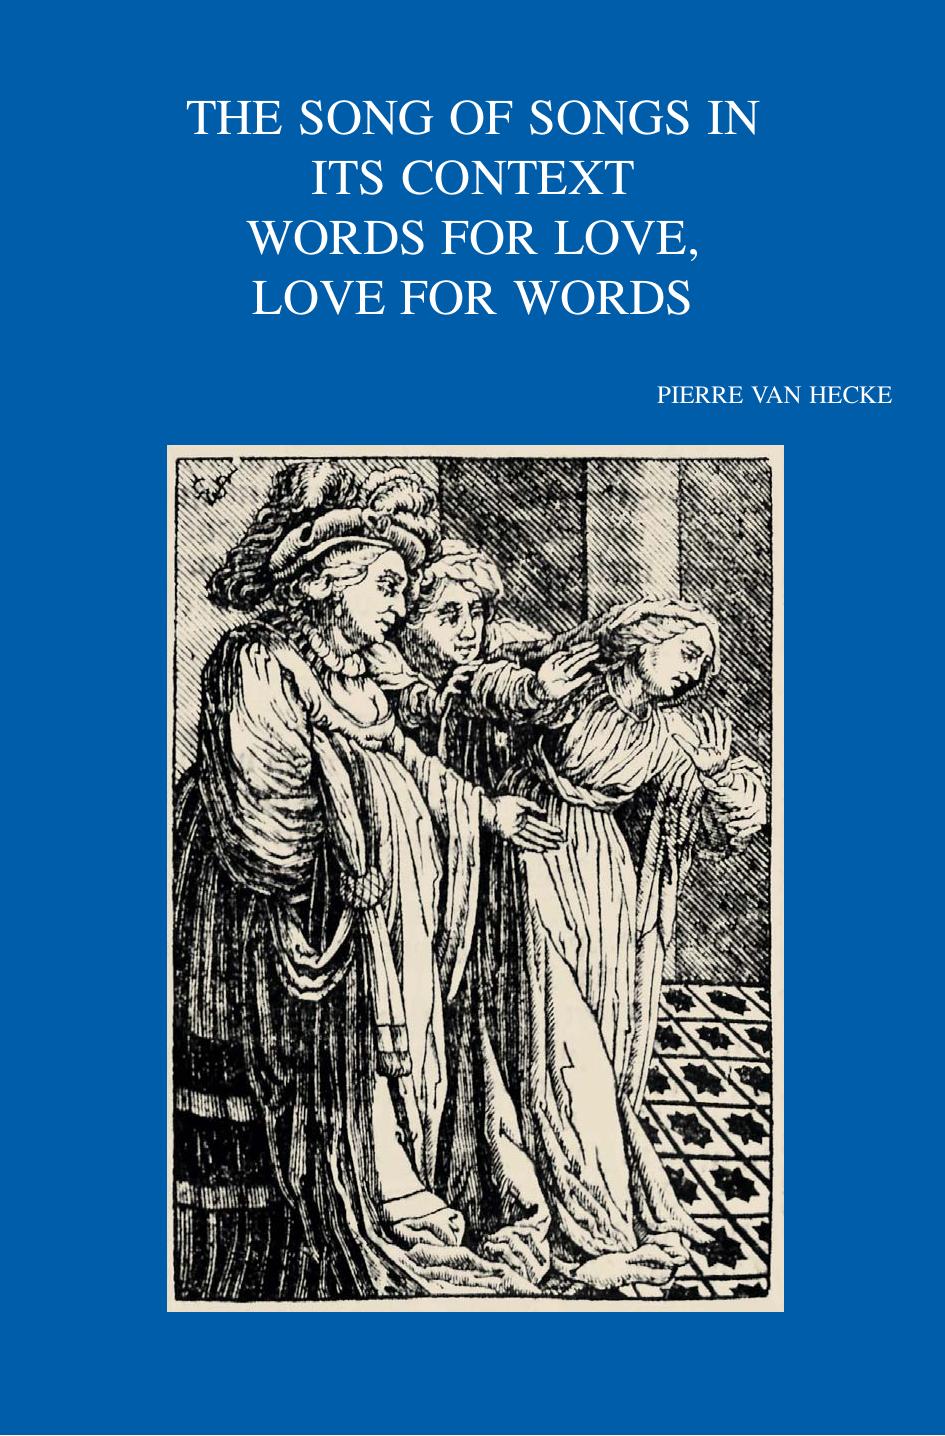 The Song of Songs in its Context. Words of Love, Love for Words by P. Van Hecke